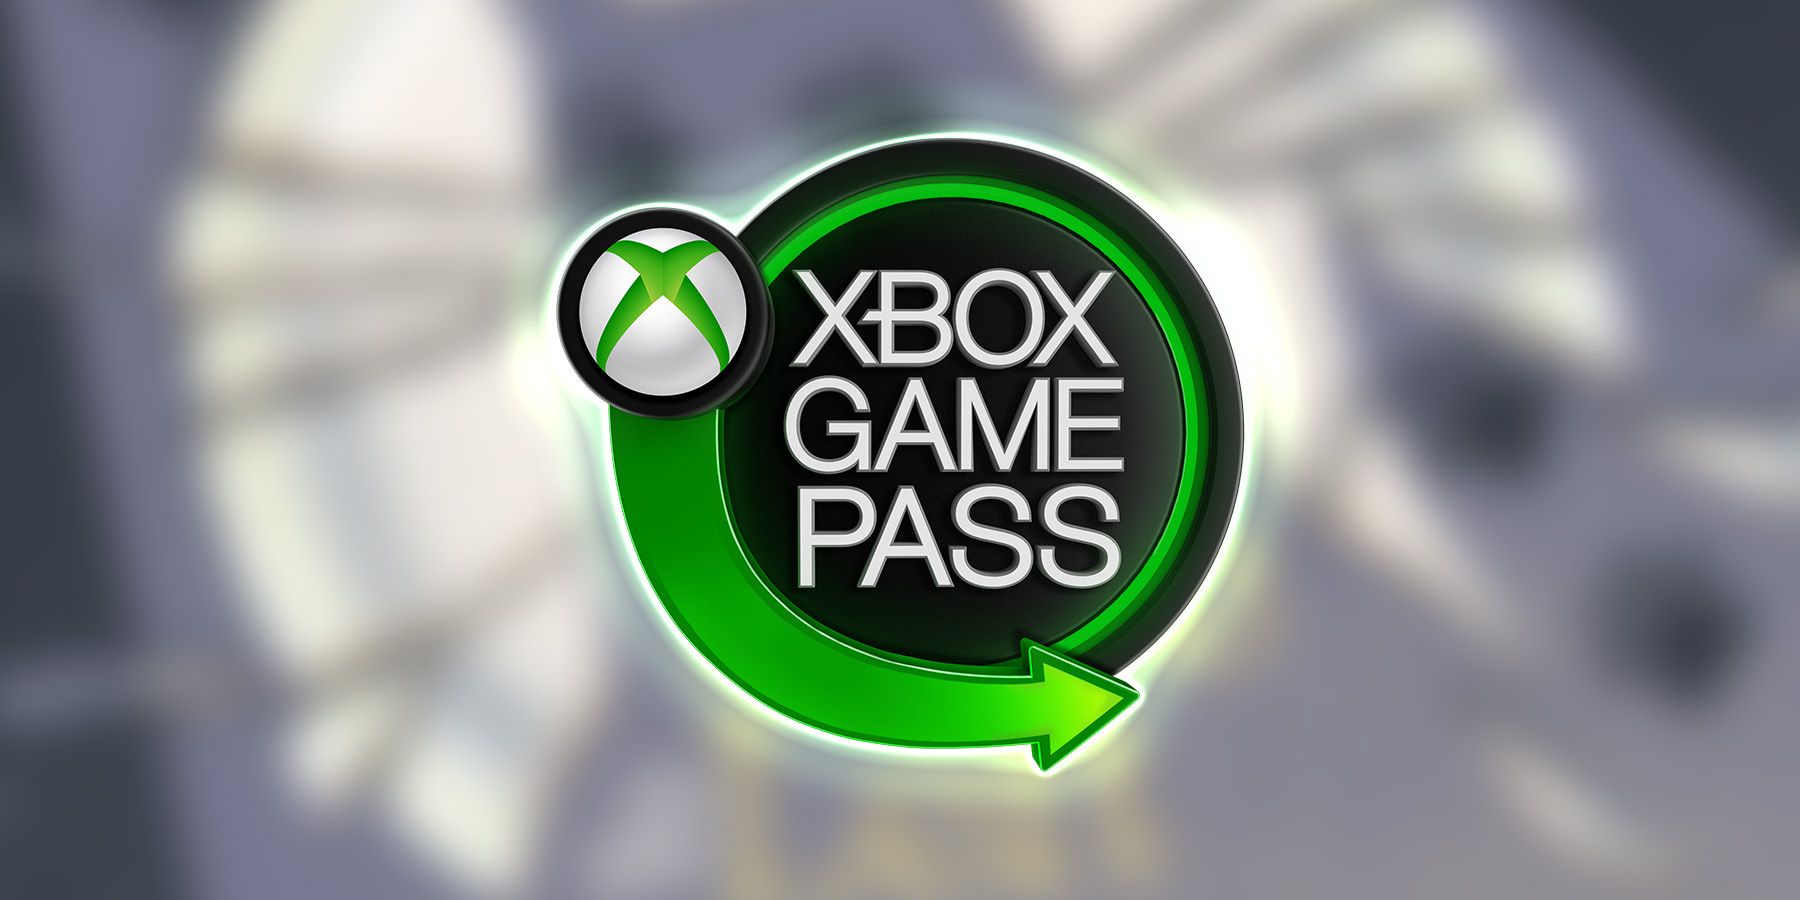 xbox game pass logo a little on the left